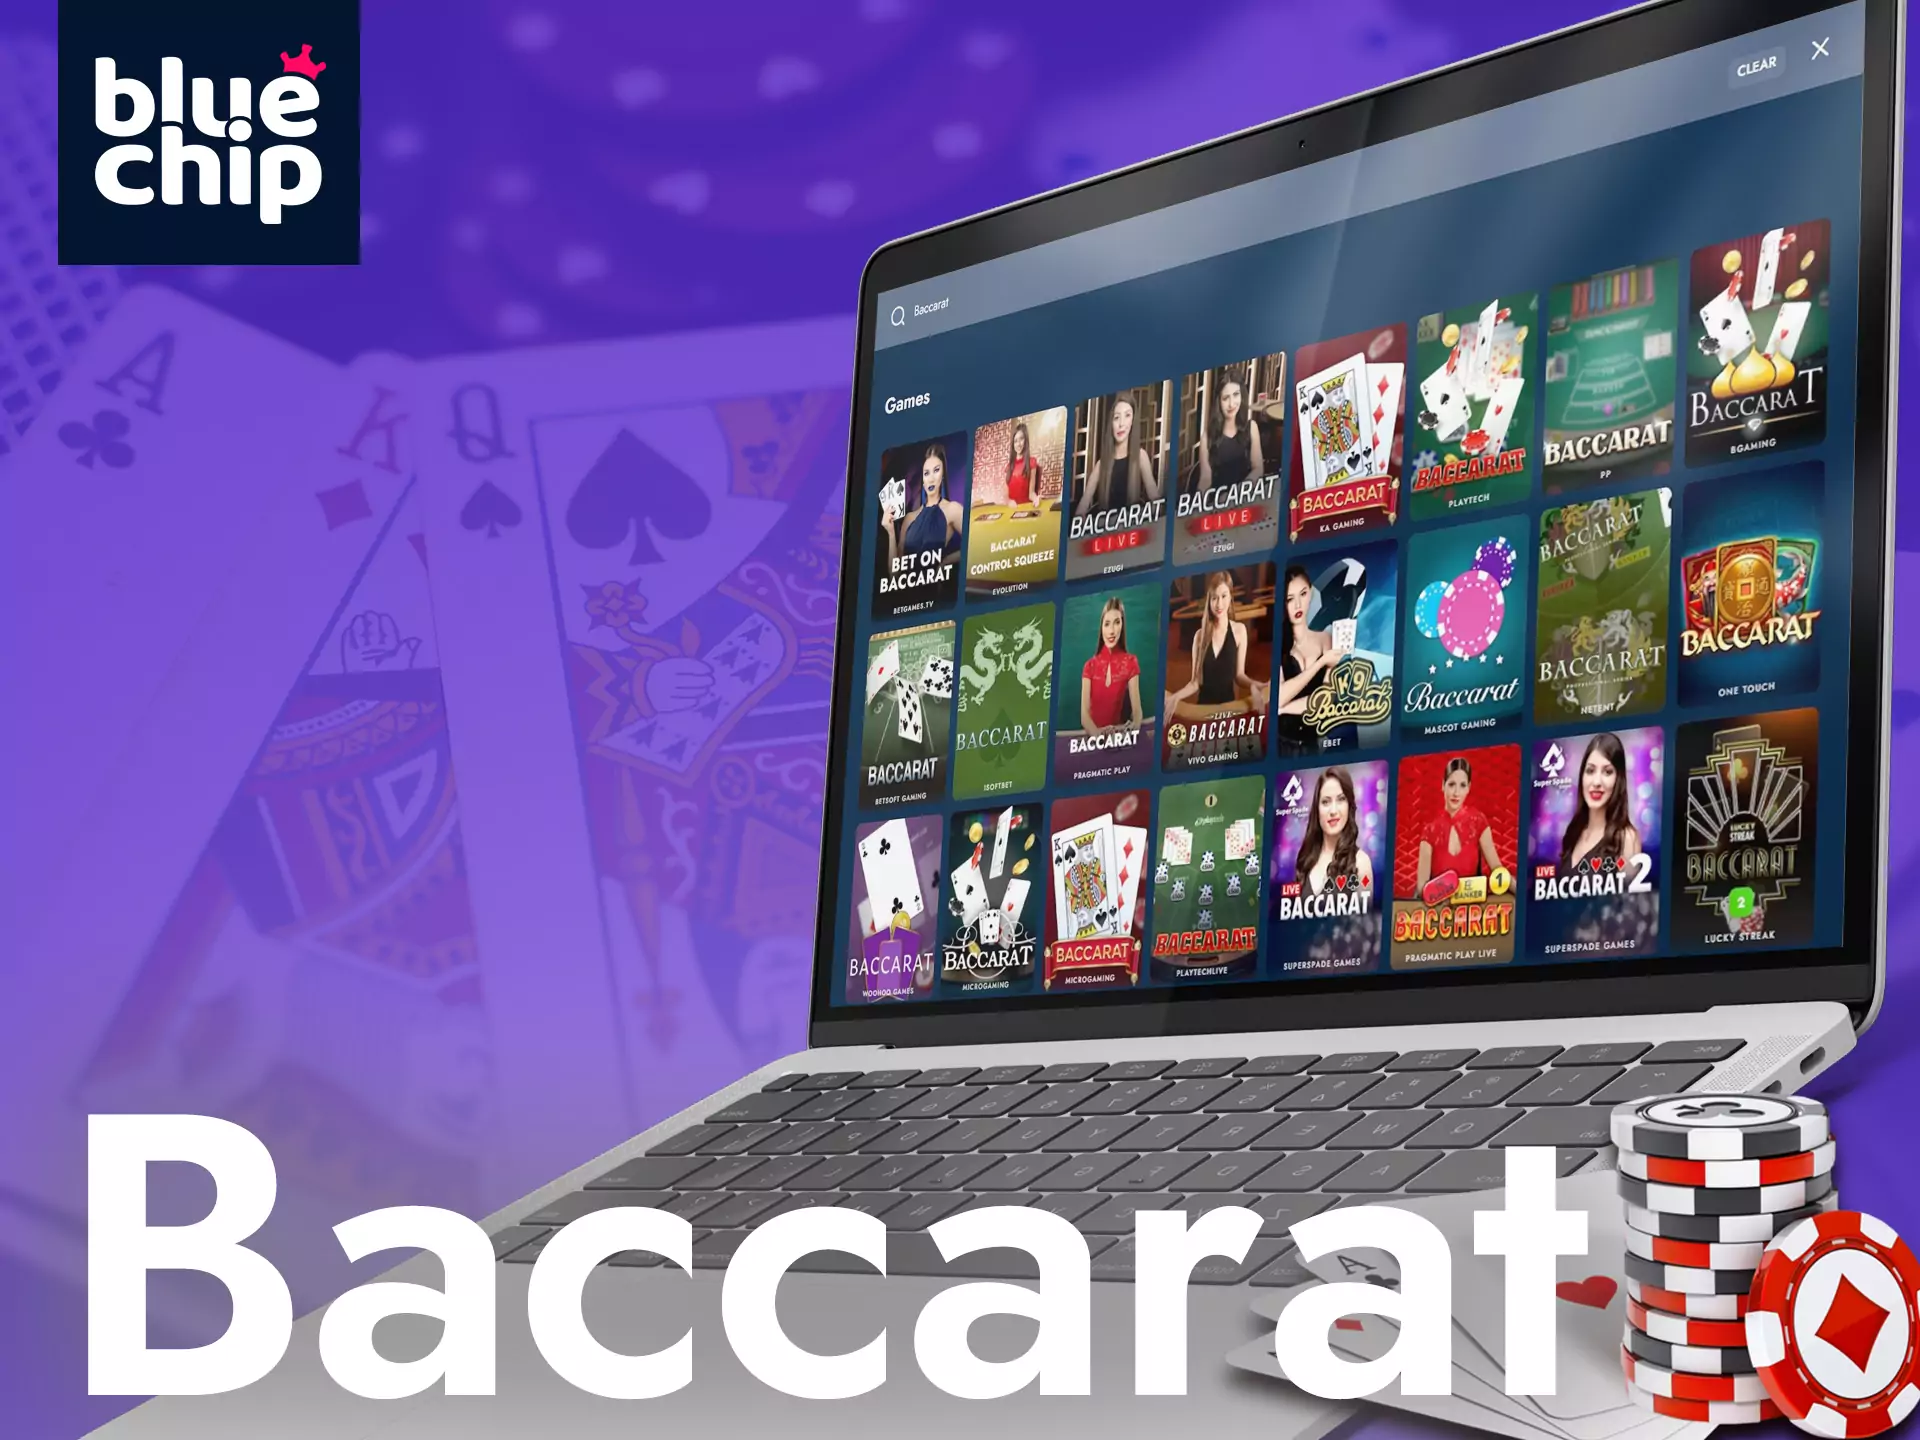 Baccarat can be played in the Bluechip Casino.